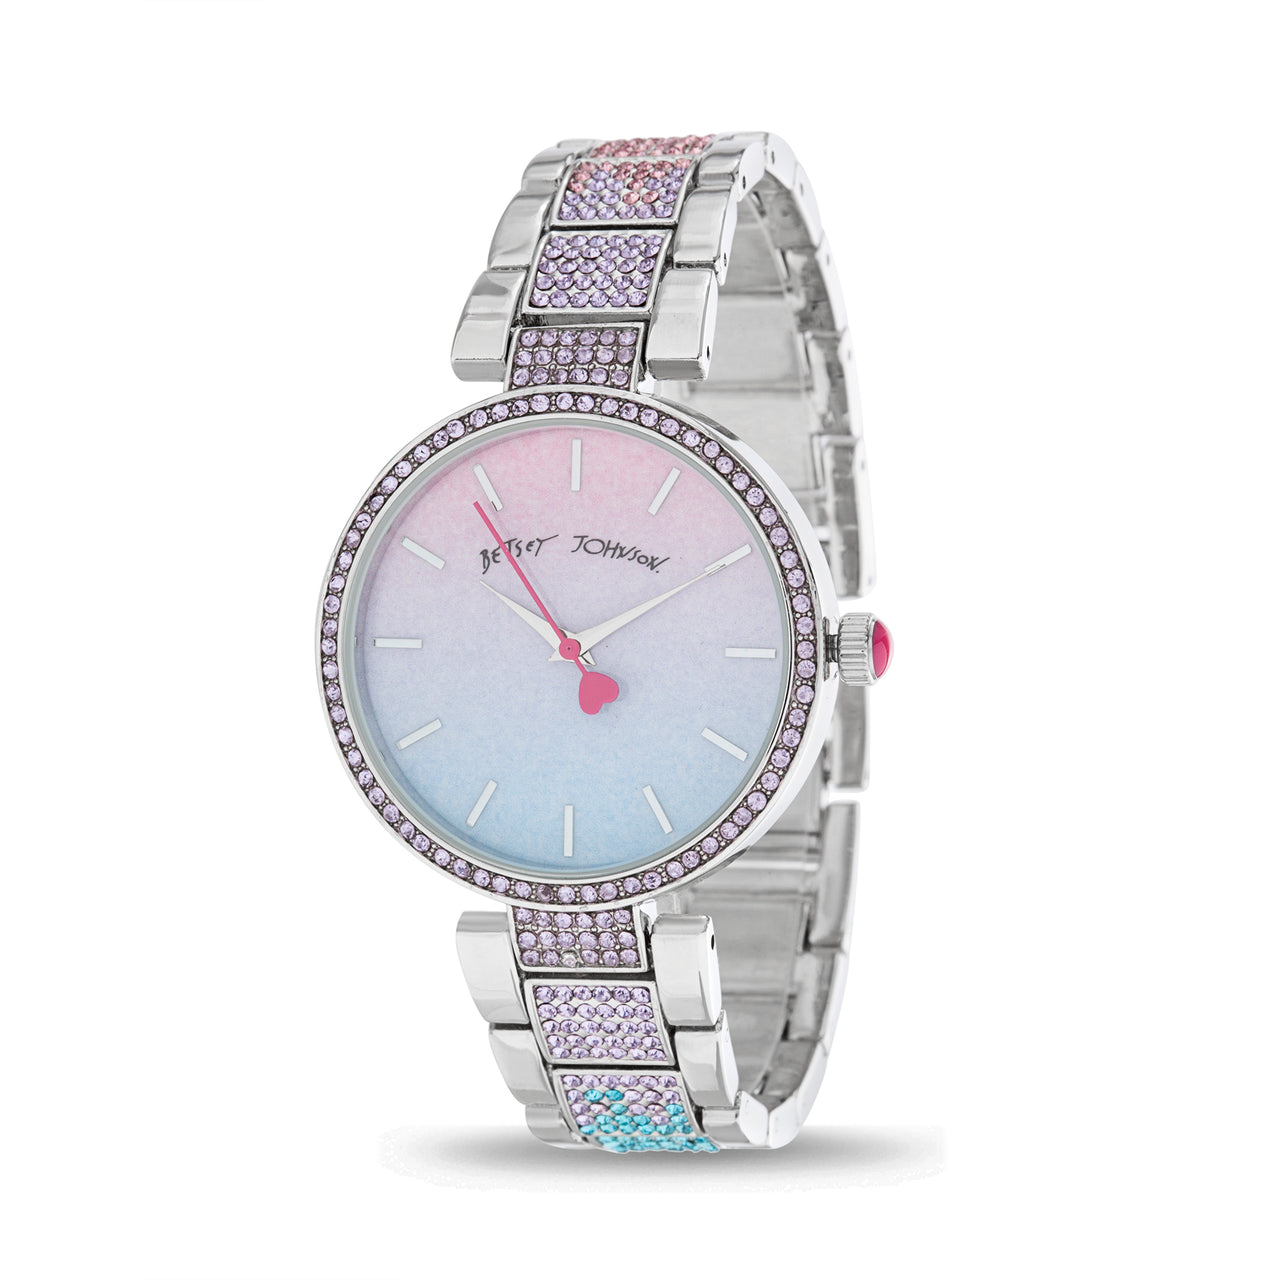 Betsey Johnson Silver Case and Strap with Multi Color Stones Degraded Glitter Dial Watch for Women